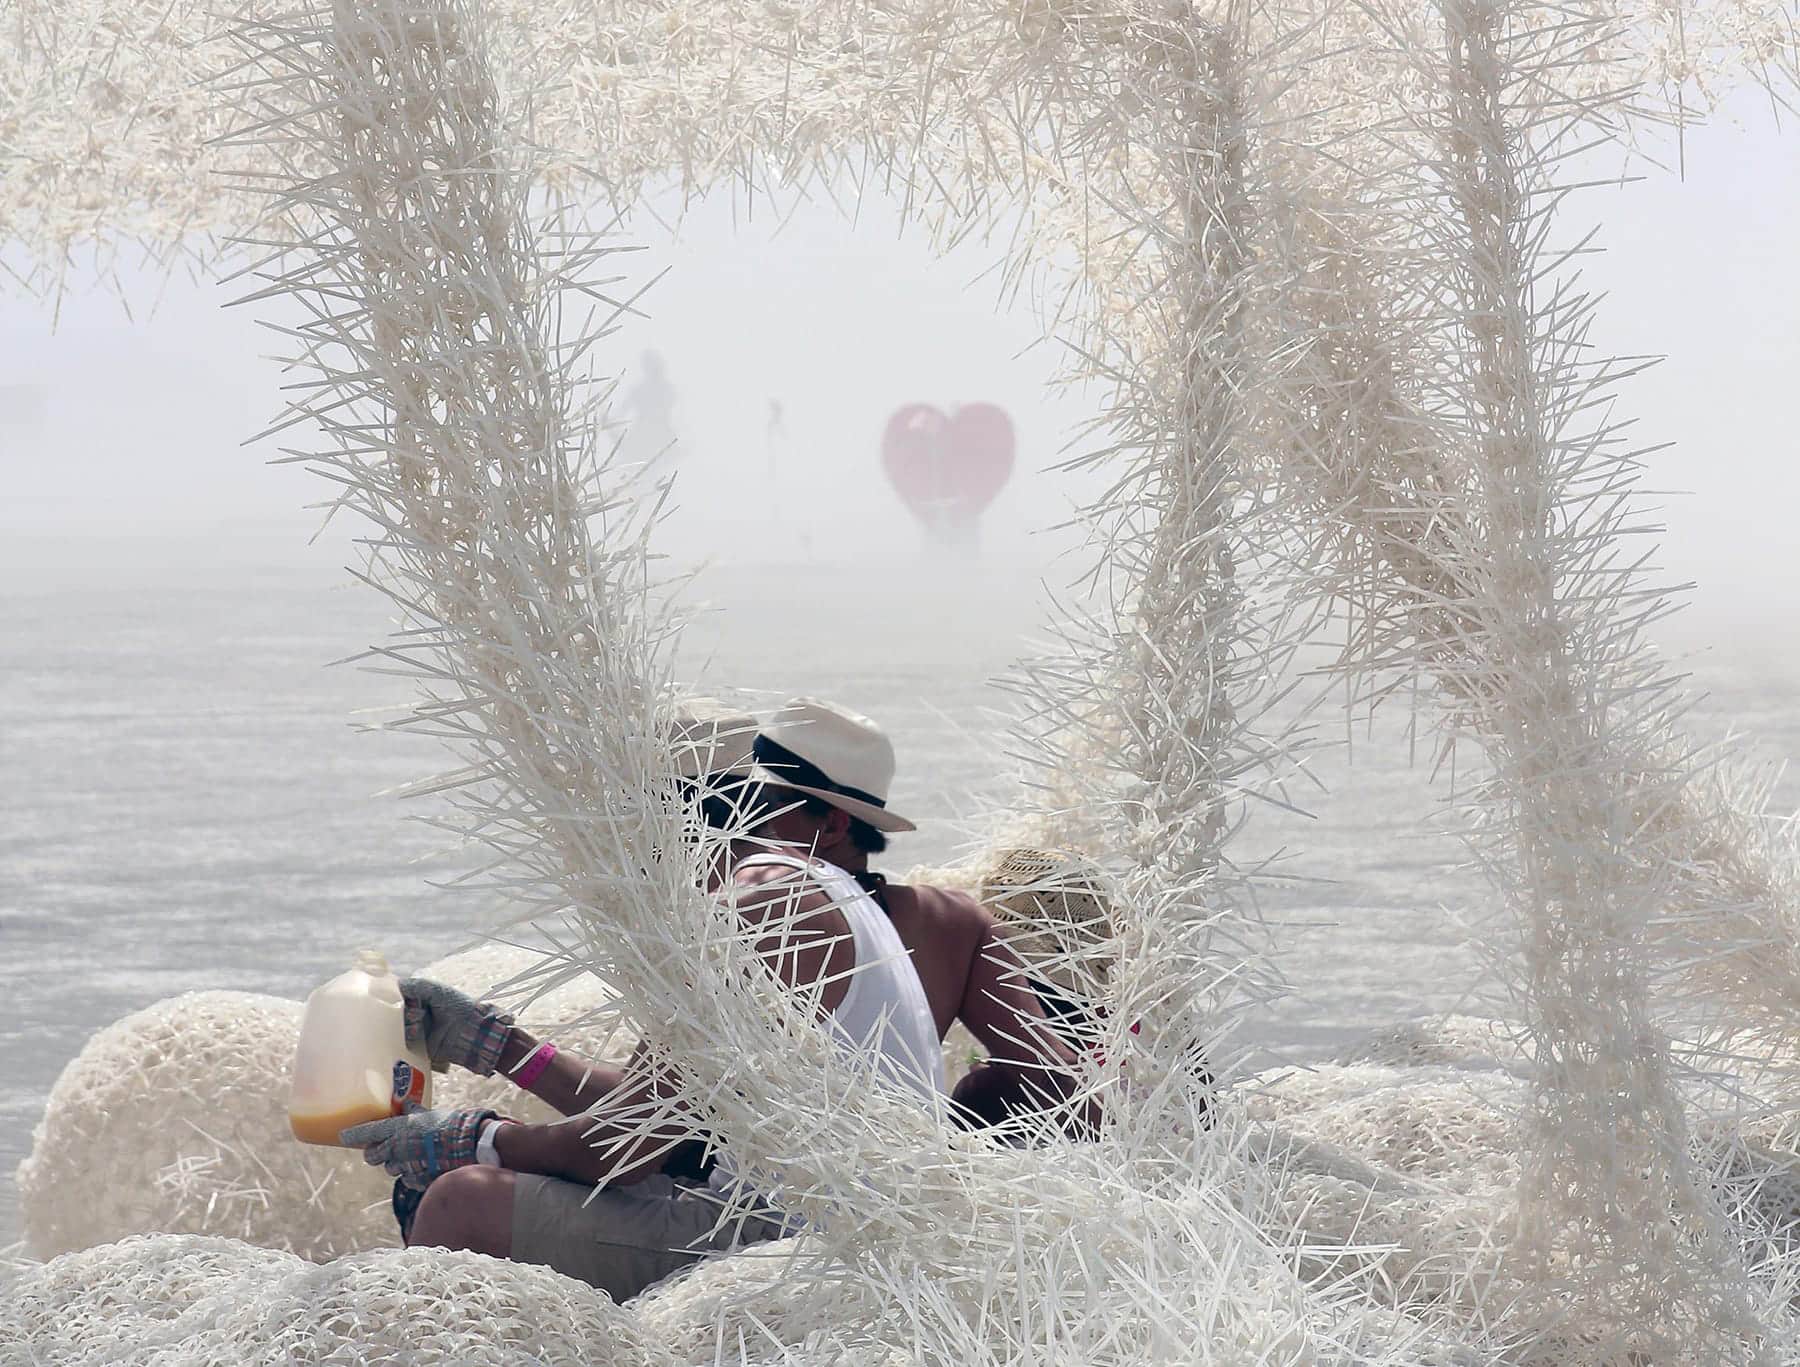 Third Space spatial installation made of white woven cable ties with wild spiky structure emerges pillows, columns and nets with two persons wearing  straw hats